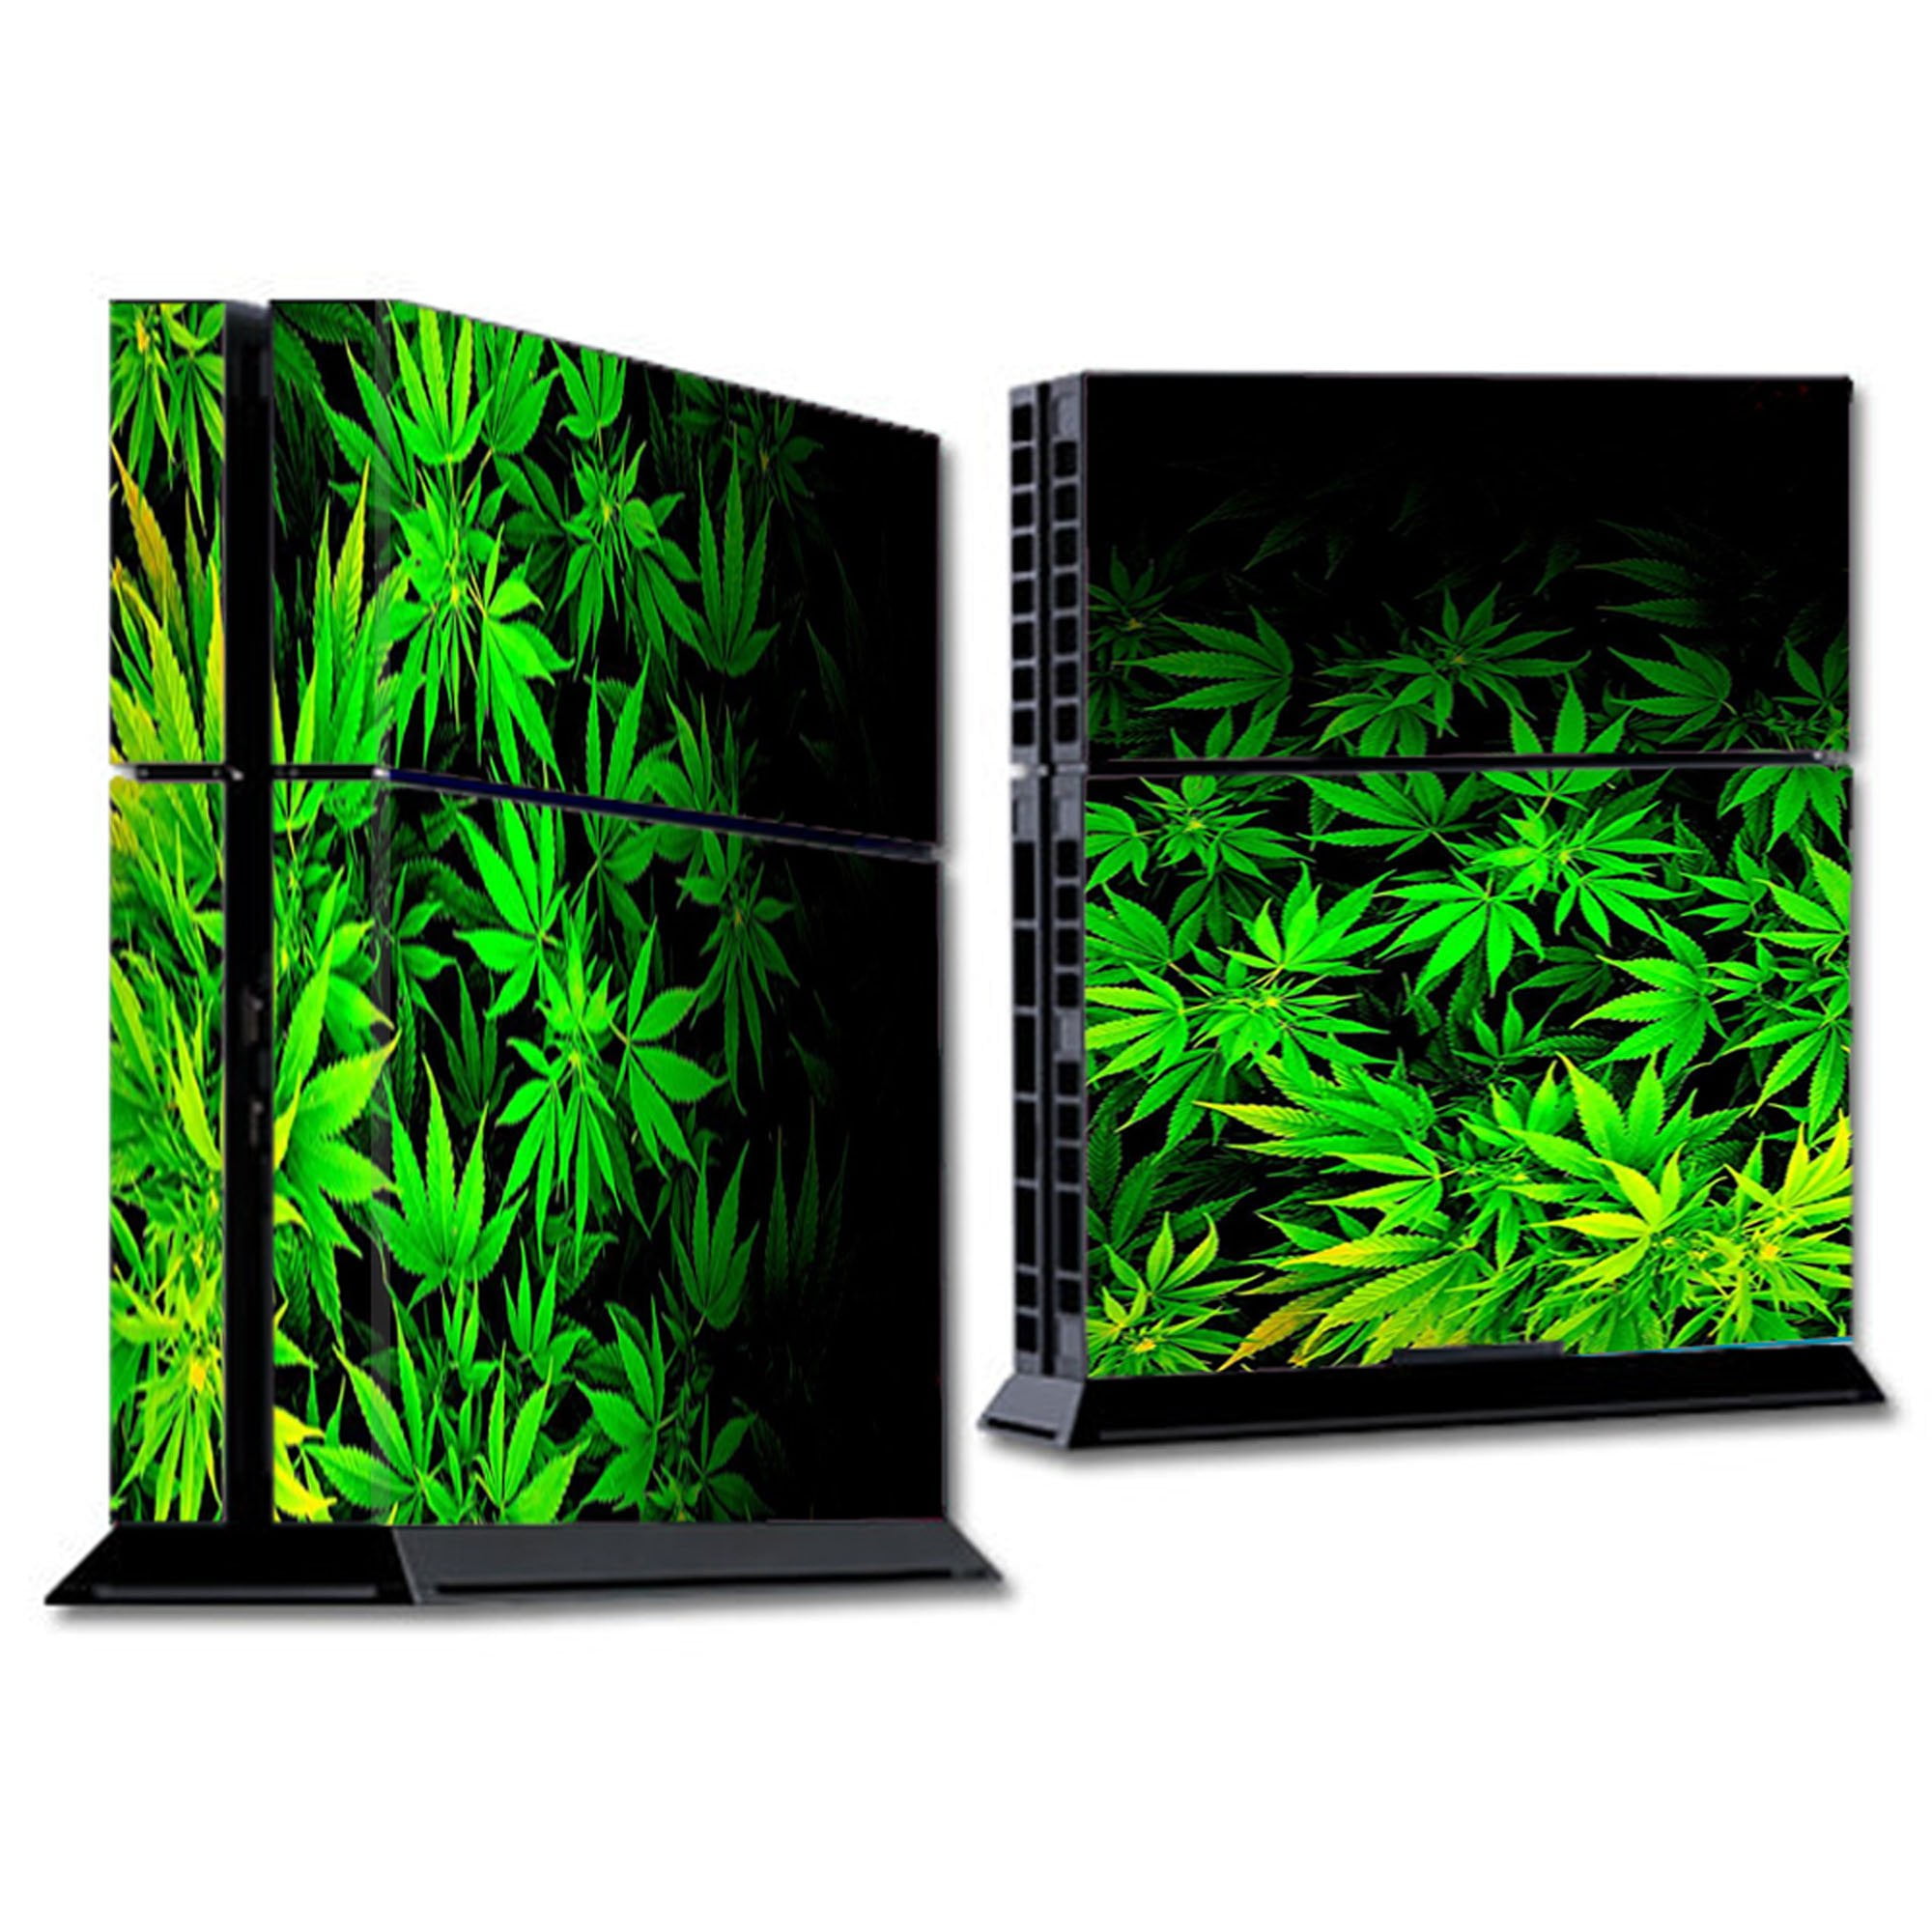 IT'S A PS4 Controller Skin for Sony PlayStation 4 Console Controller Decal Stickers Cover -weed green bud marijuana leaves - Walmart.com